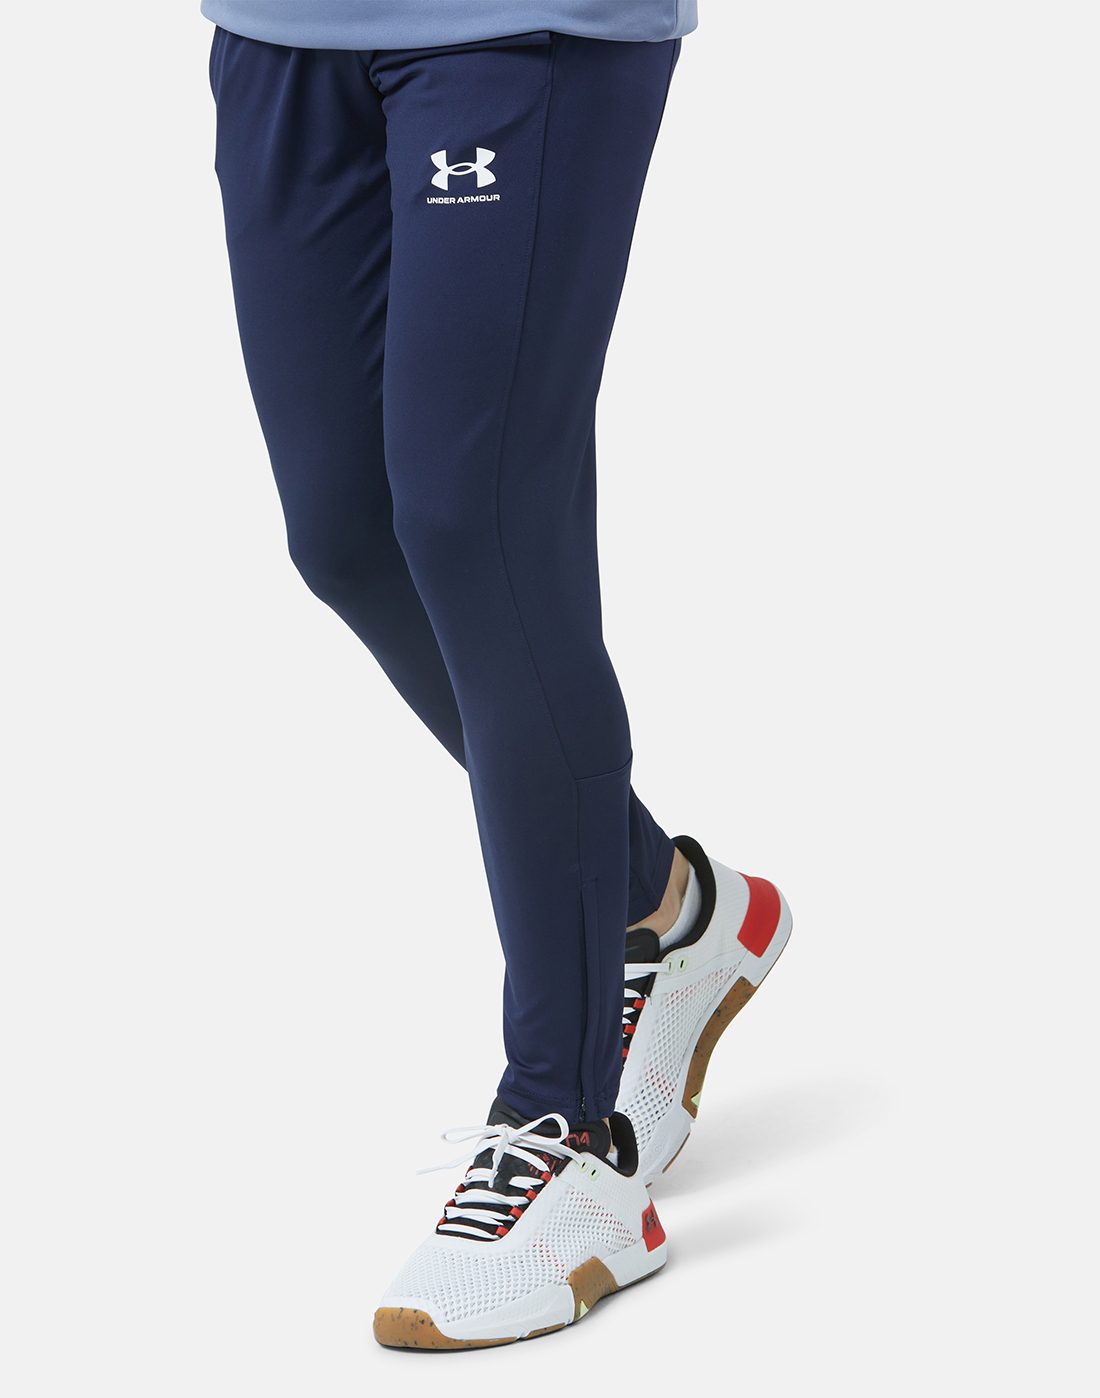 Under Armour Mens Challenger Training Pants - Navy